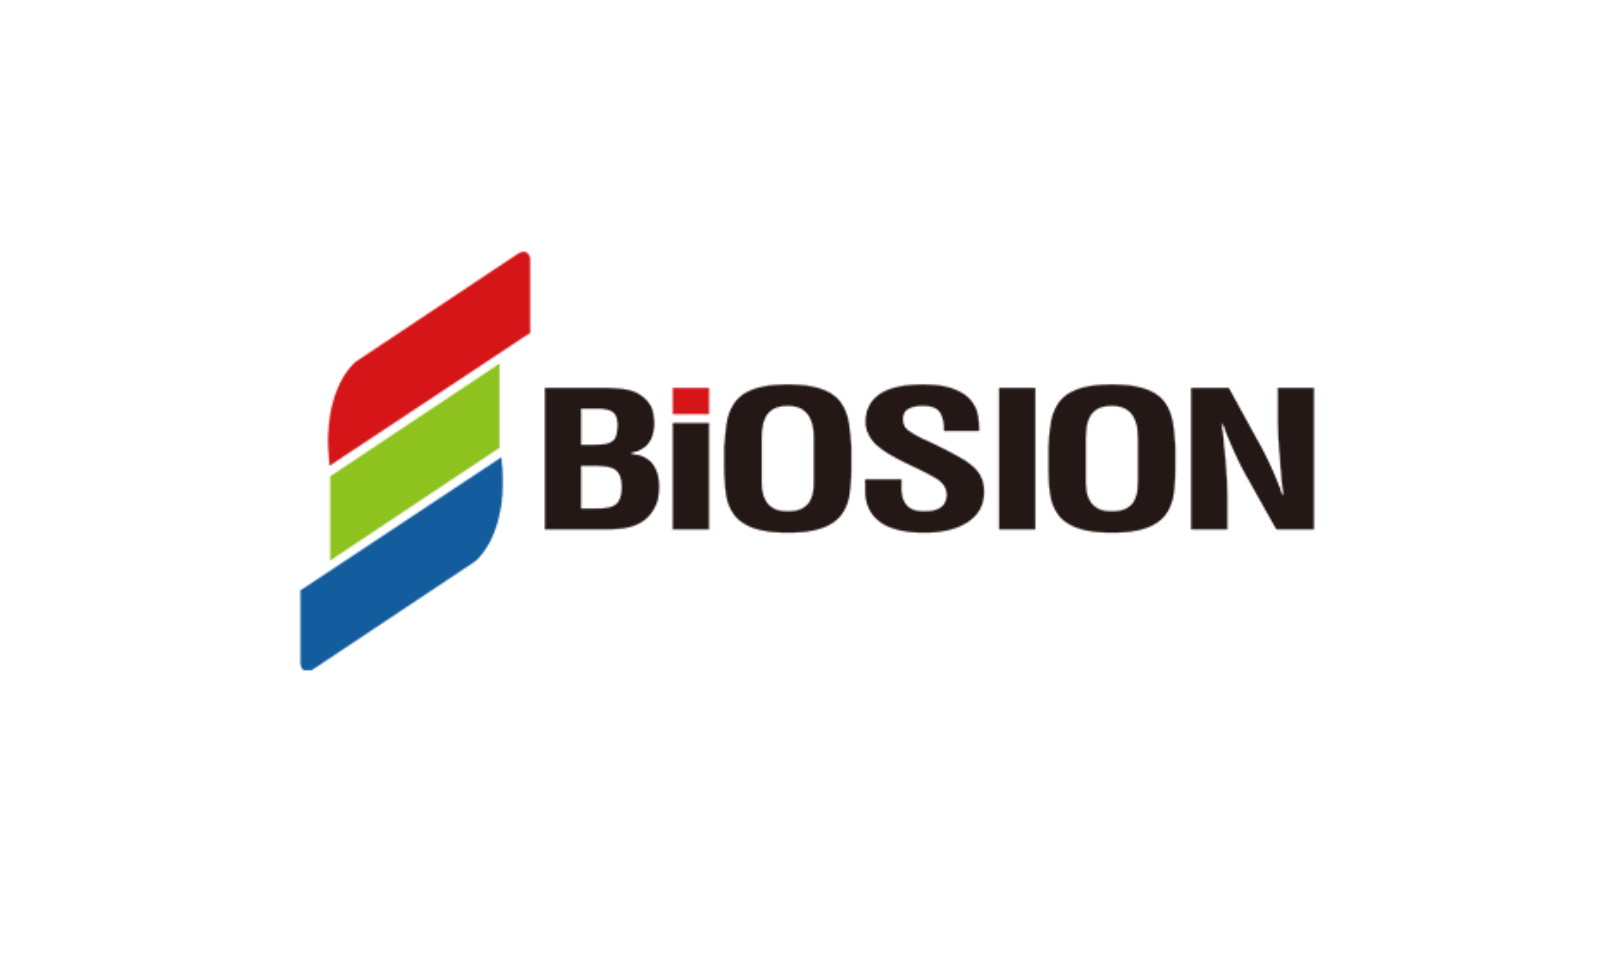 Biosion Presents Discovery and Development Data at PEGS for its Anti-CD40 Agonistic Antibody